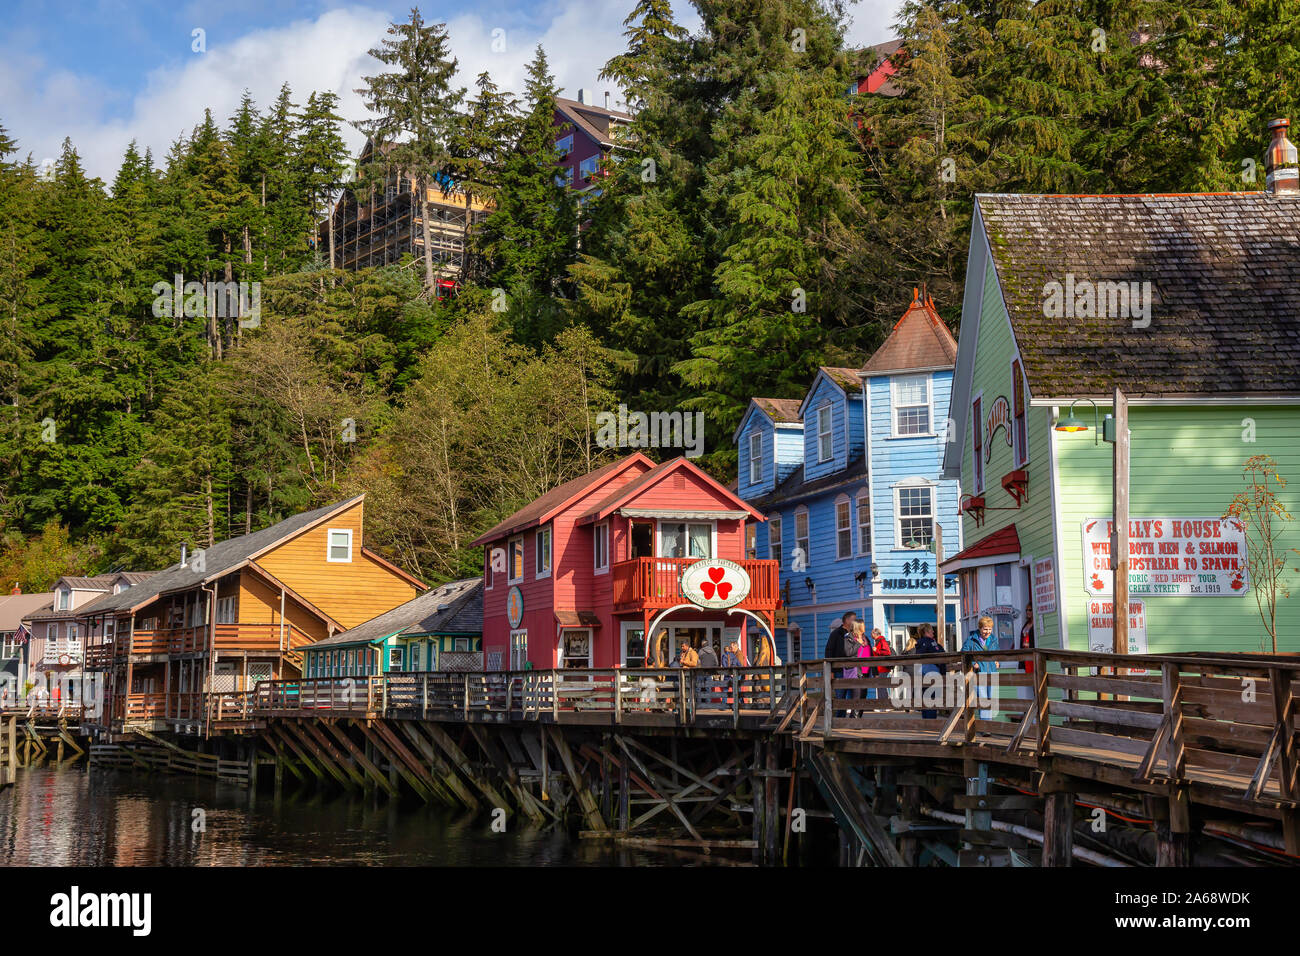 Ketchikan, Alaska, United States - September 26, 2019: Beautiful View of a Famous Creek Street in a small touristic town on the Ocean Coast during a s Stock Photo